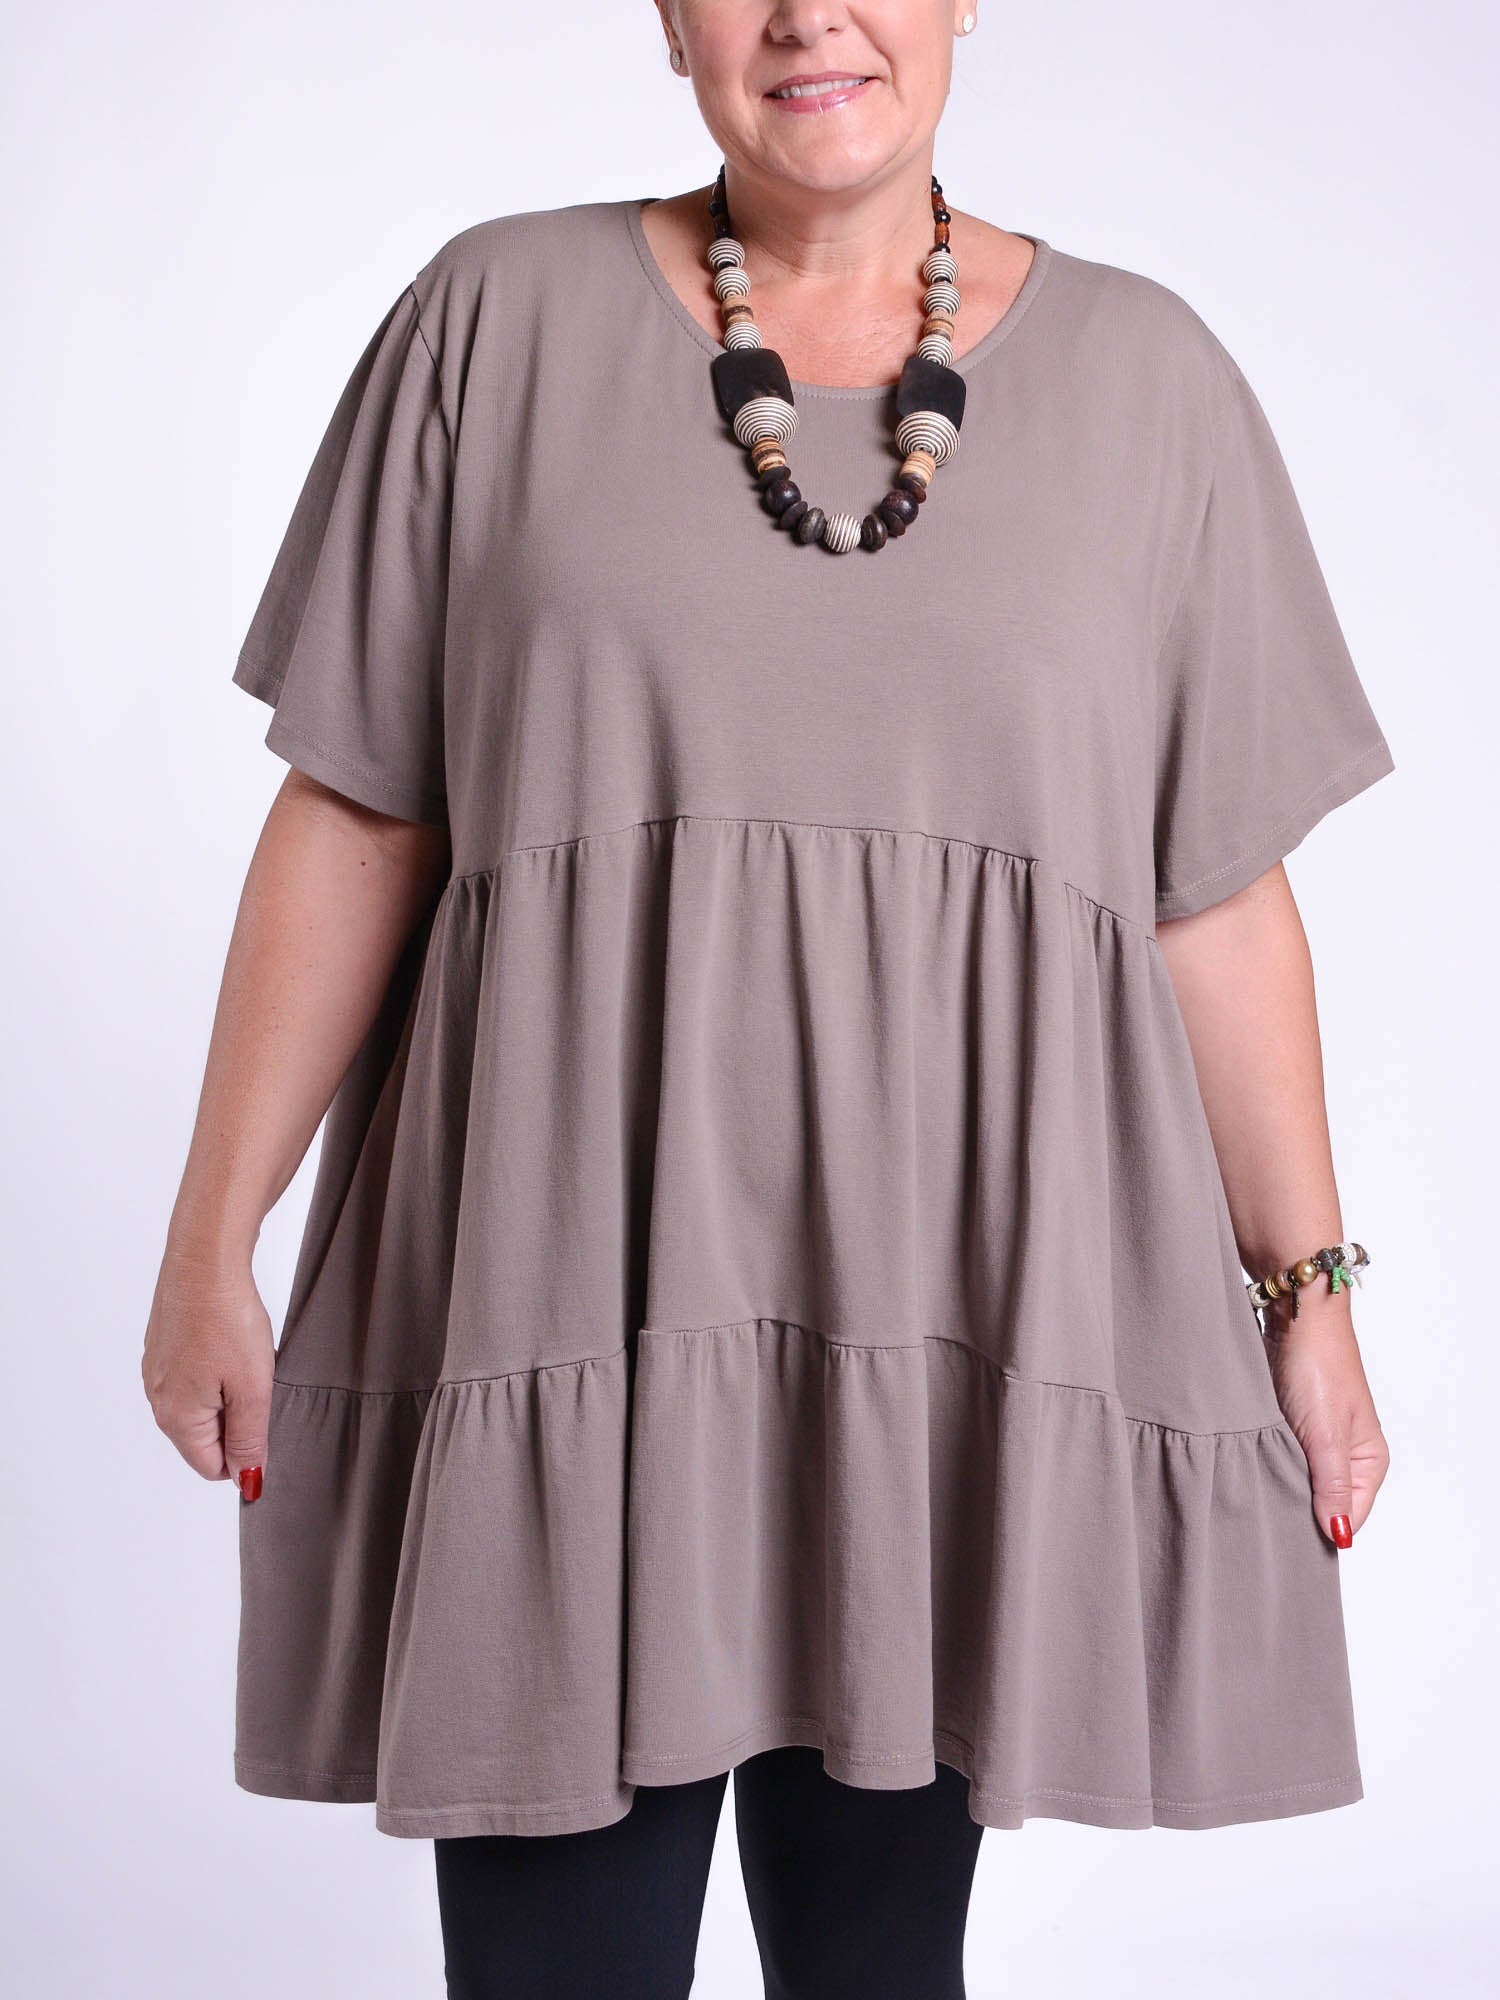 Cotton Tiered Tunic - 10955, Tops & Shirts, Pure Plus Clothing, Lagenlook Clothing, Plus Size Fashion, Over 50 Fashion